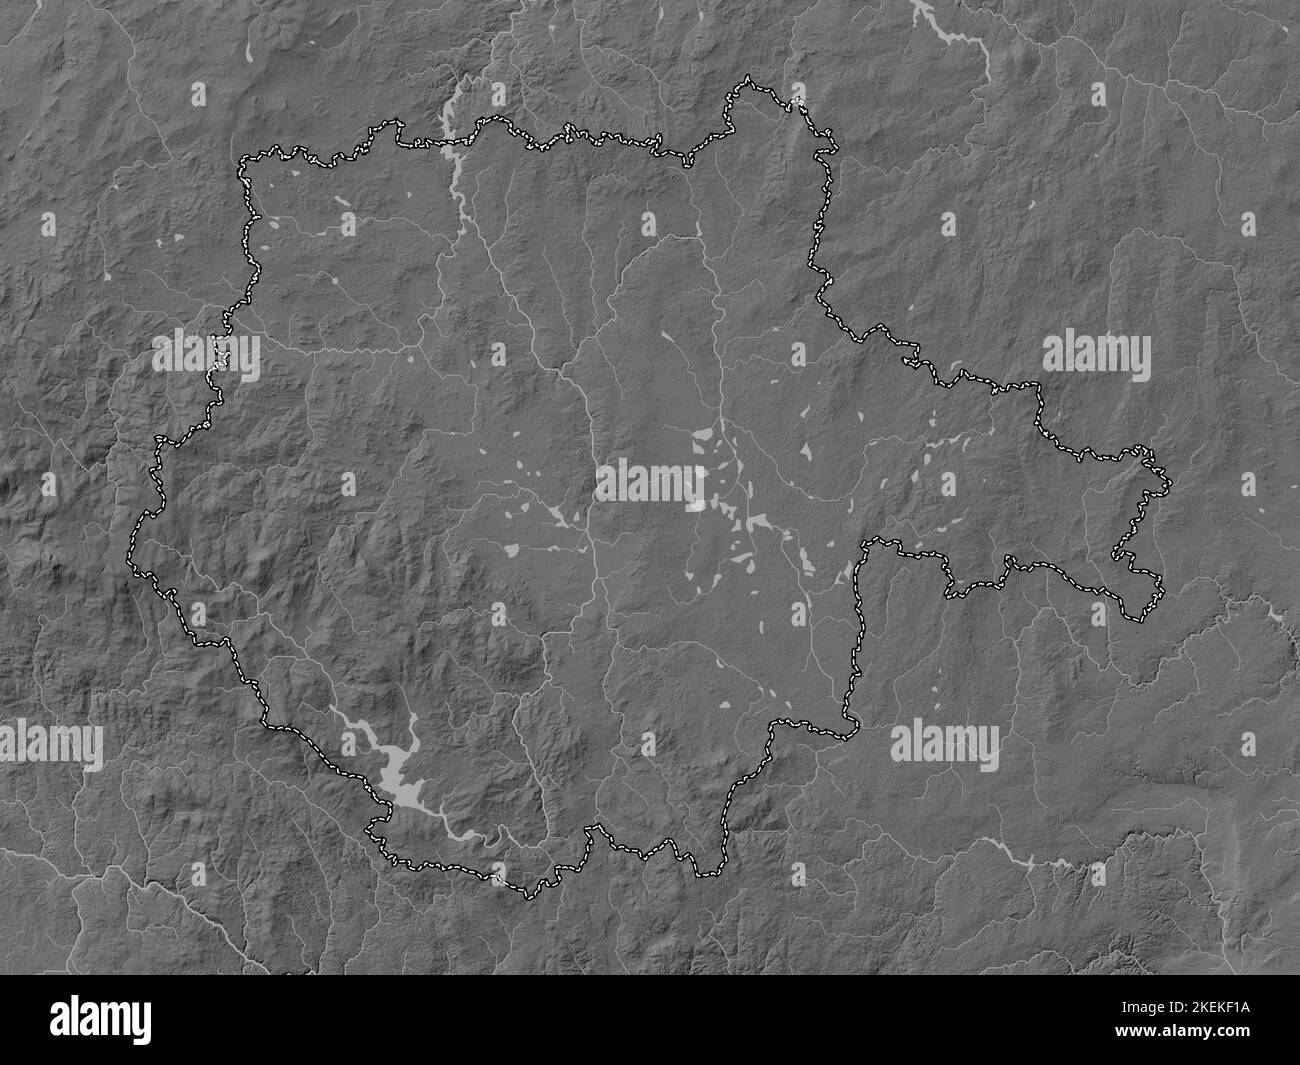 Jihocesky, region of Czech Republic. Grayscale elevation map with lakes and rivers Stock Photo